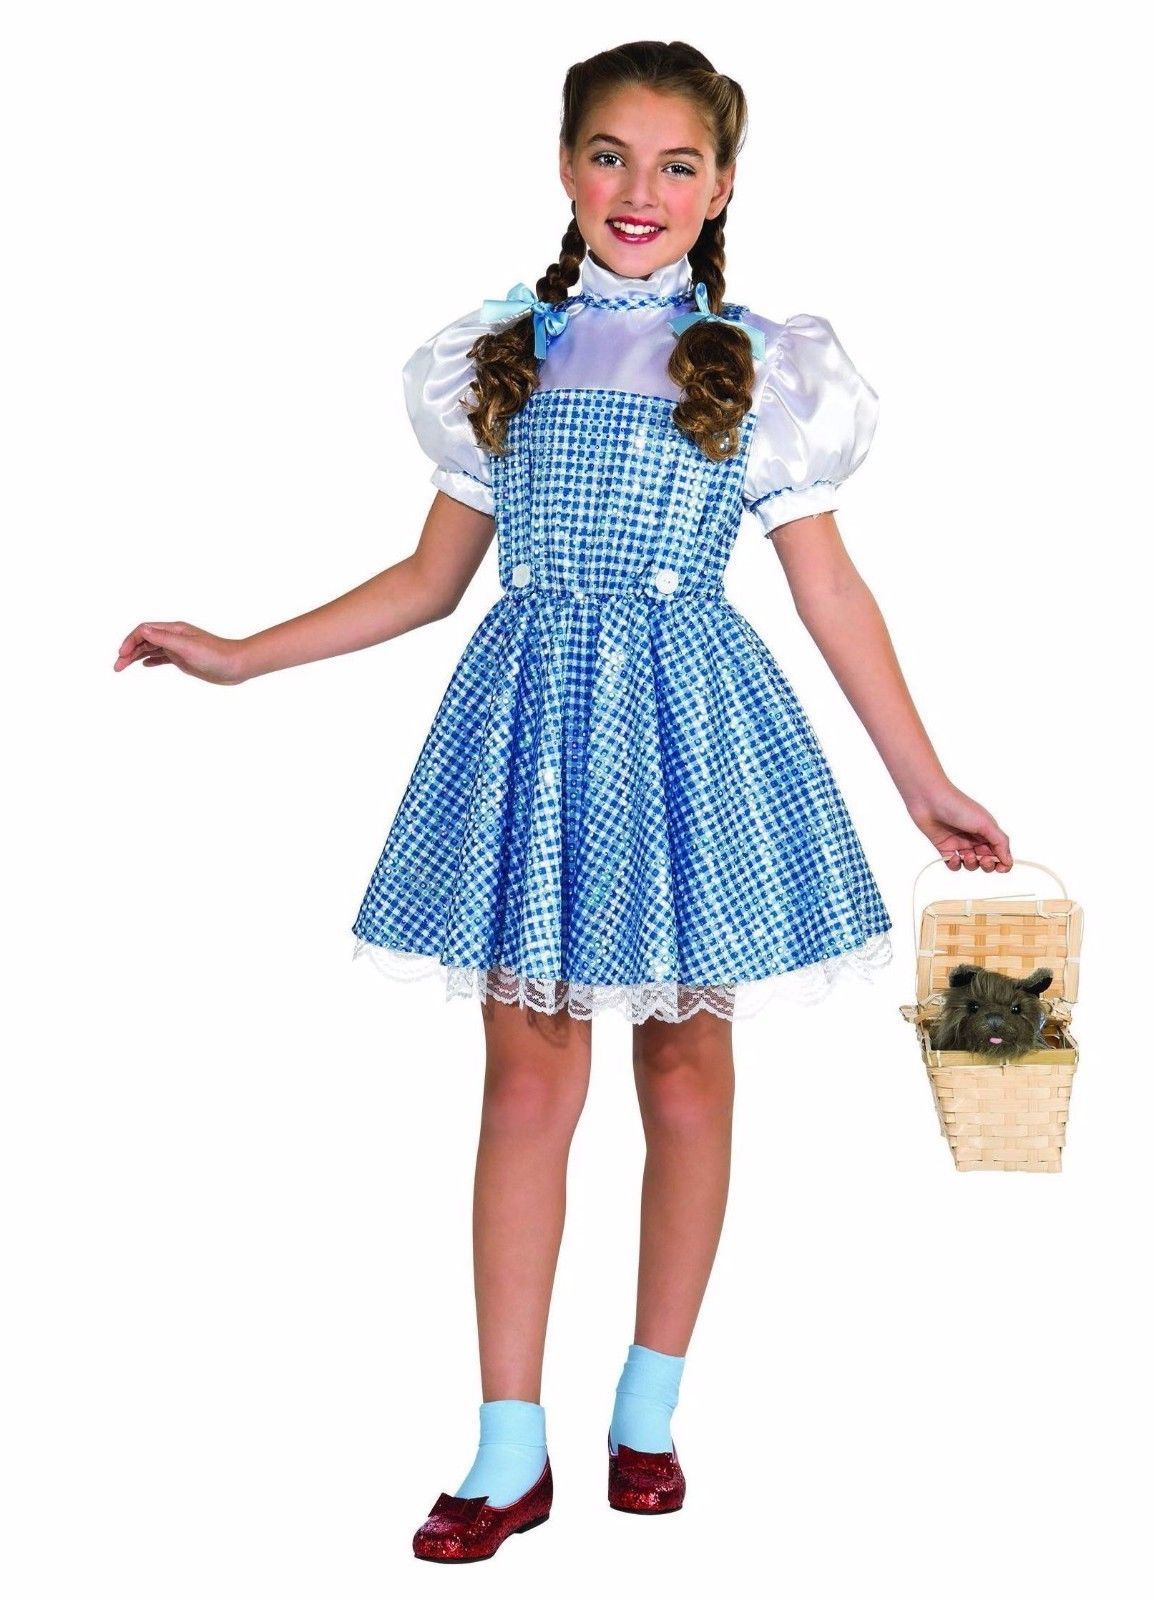 NEW Wizard of Oz Dorothy Sequin Child Halloween Costume by Rubies, S (3 ...